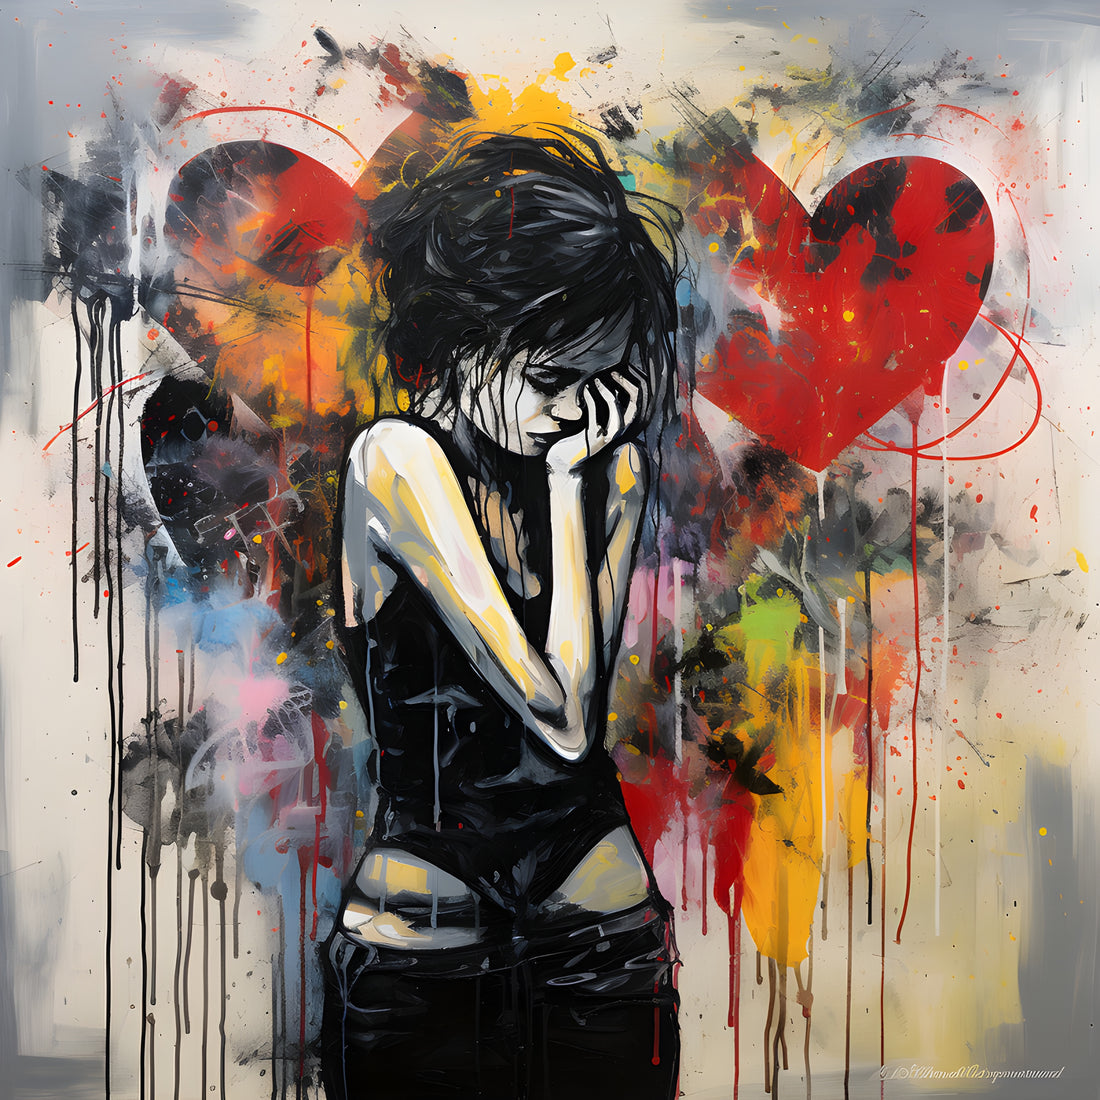 Emotive street art style painting depicting a figure in silhouette with a contemplative pose against a backdrop of vibrant, dripping splashes of paint and floating red balloons, conveying a powerful blend of melancholy and hope.